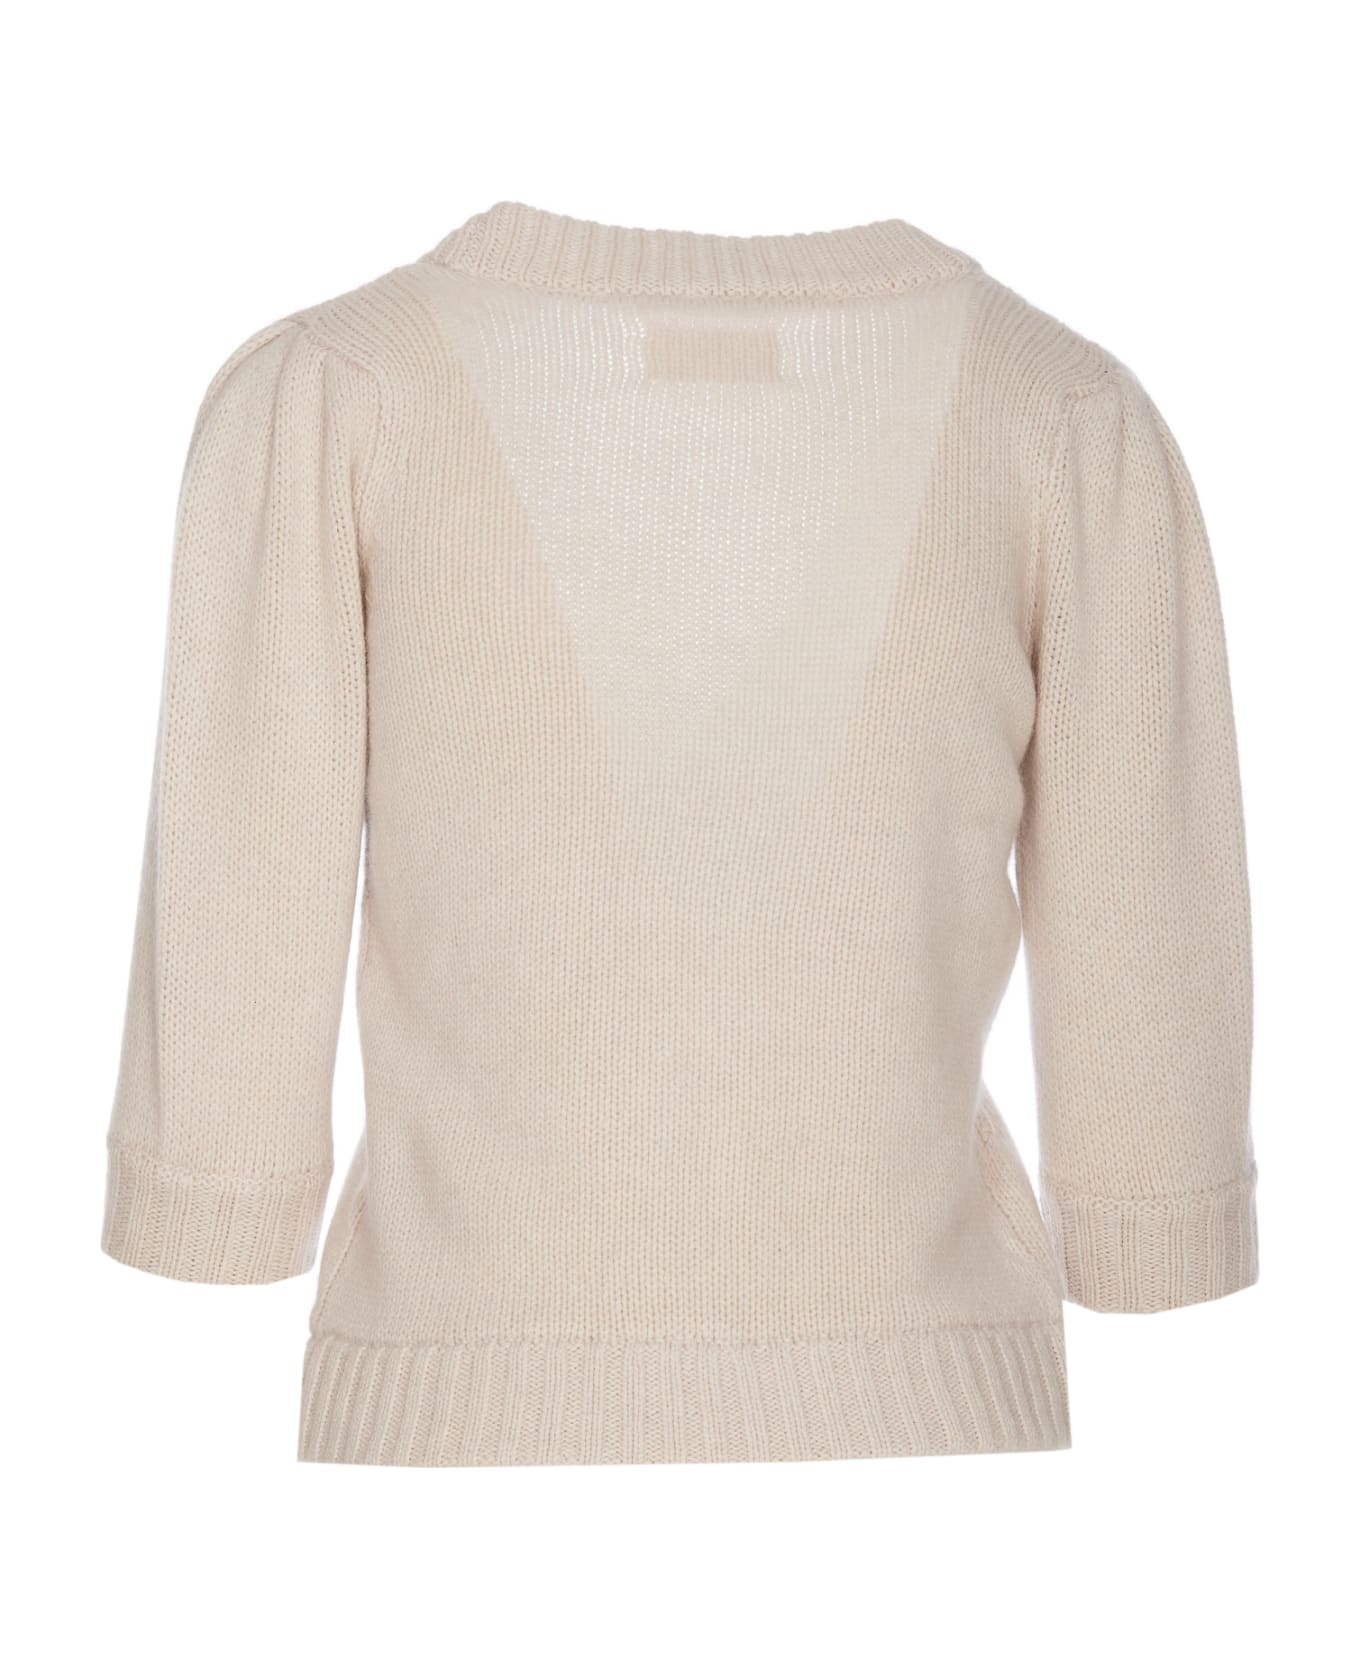 Zadig & Voltaire Betsy Cashmere Cardigan - Beige カーディガン